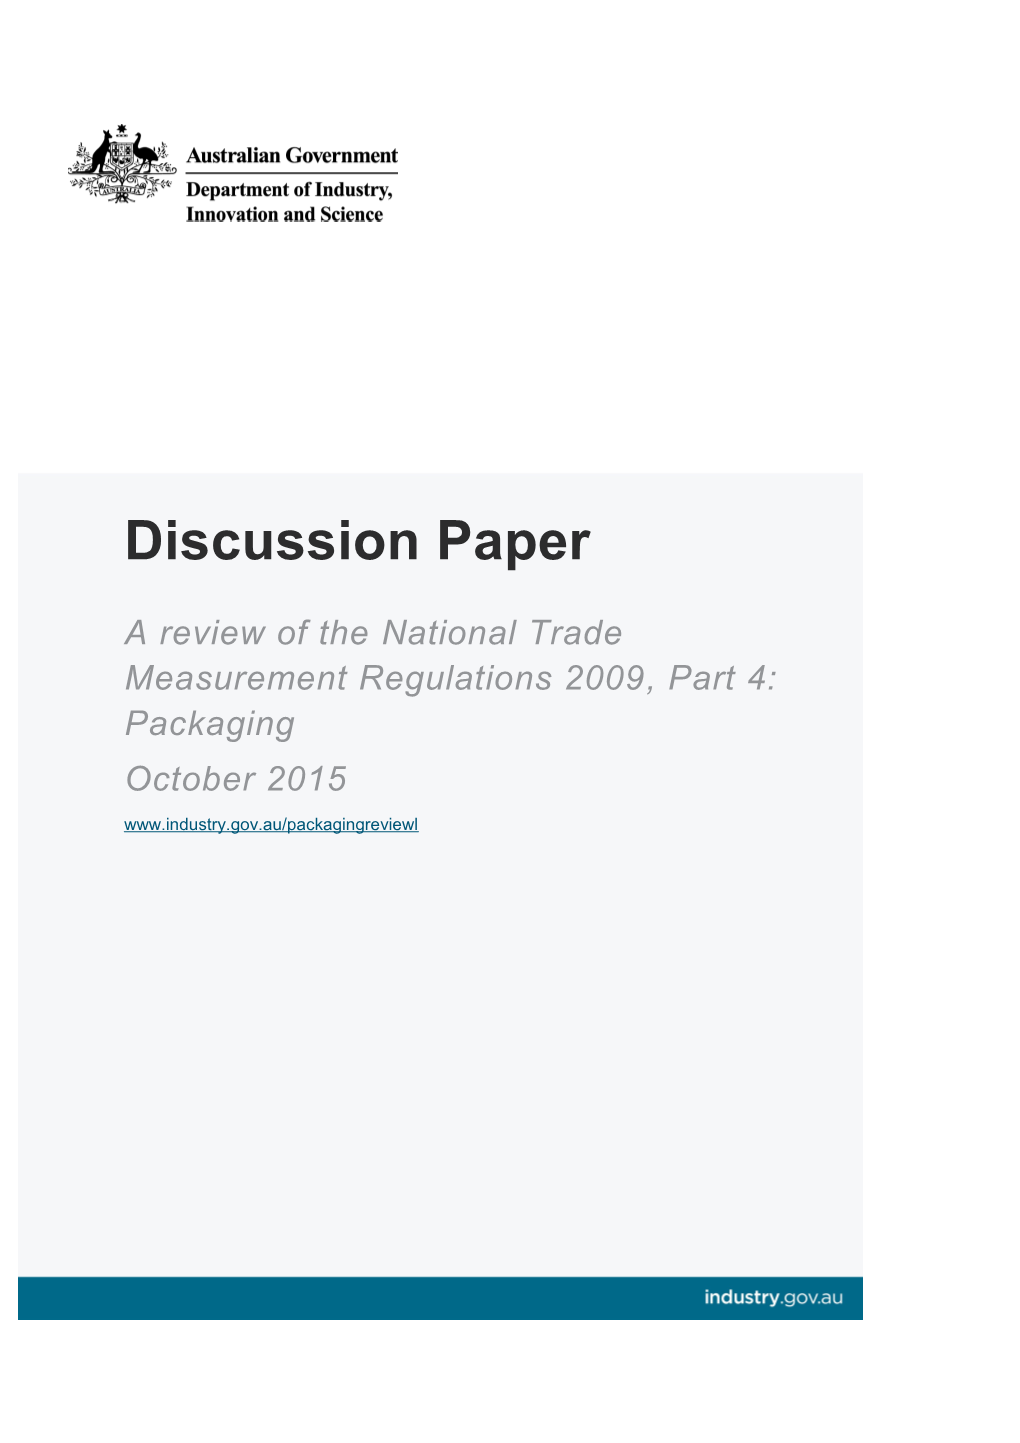 Discussion Paper - Review of the National Trade Measurement Regulations 2009